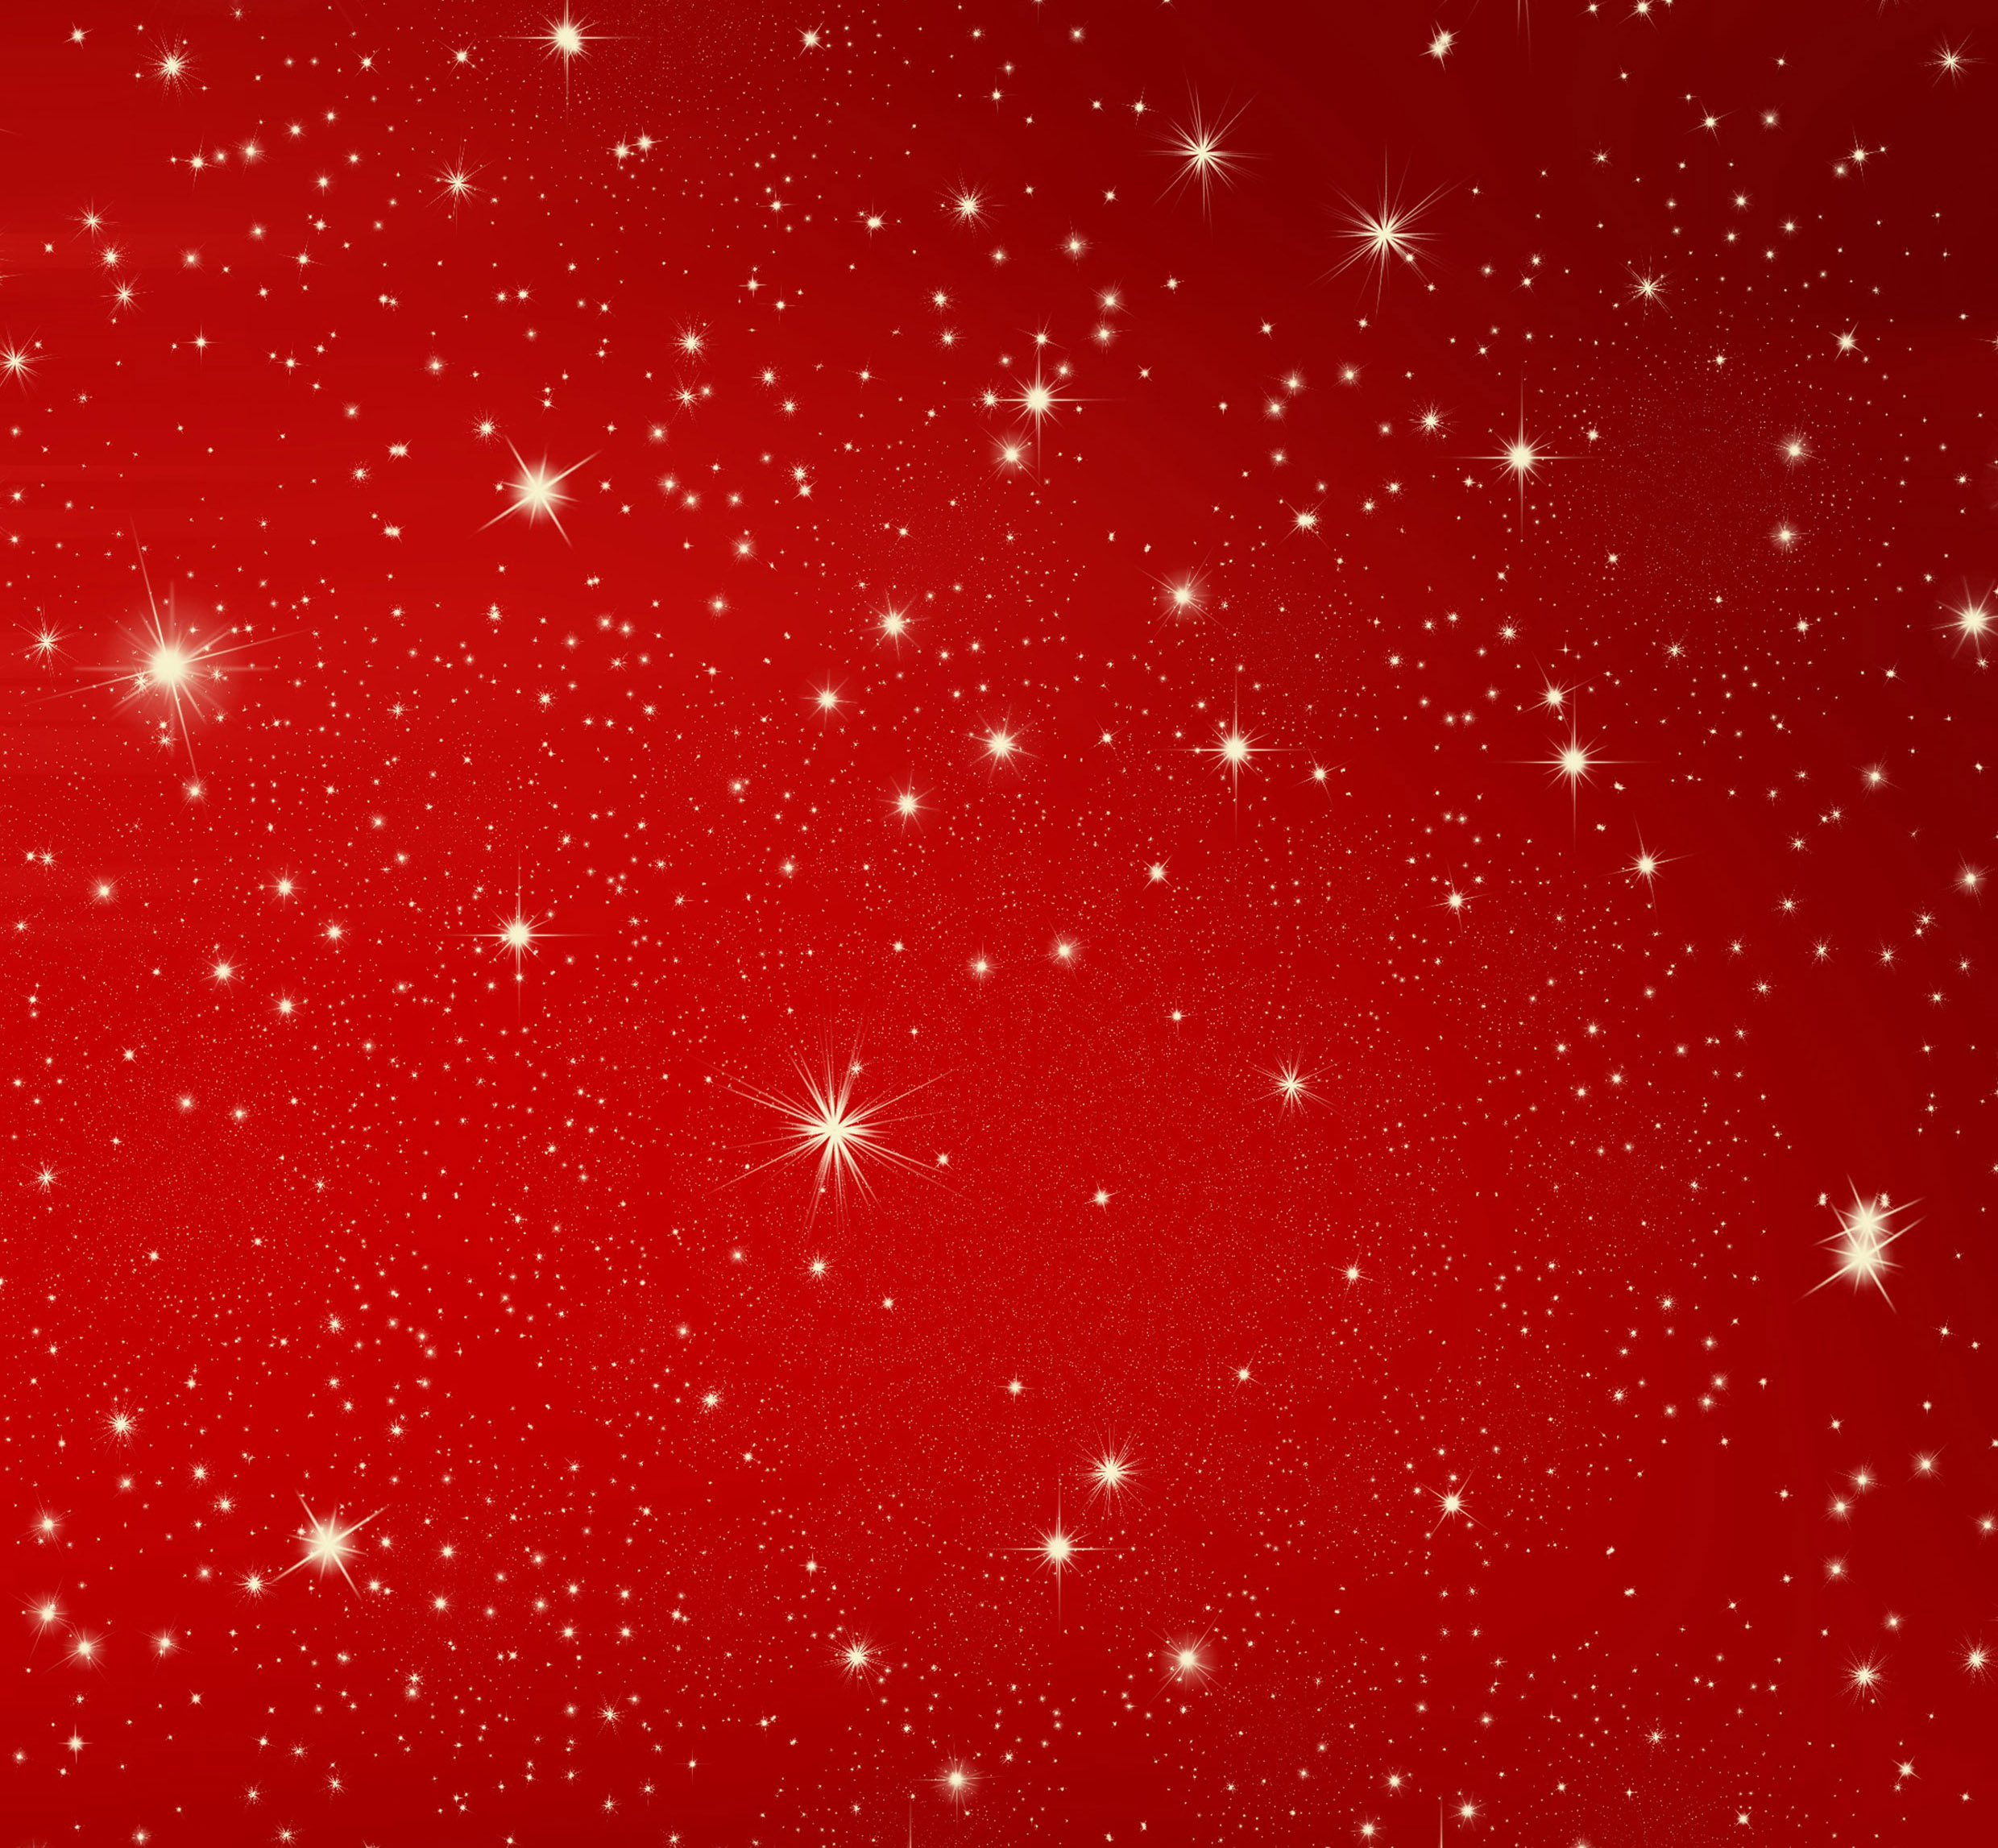 Starfield On Red Christmas Sky Background Image